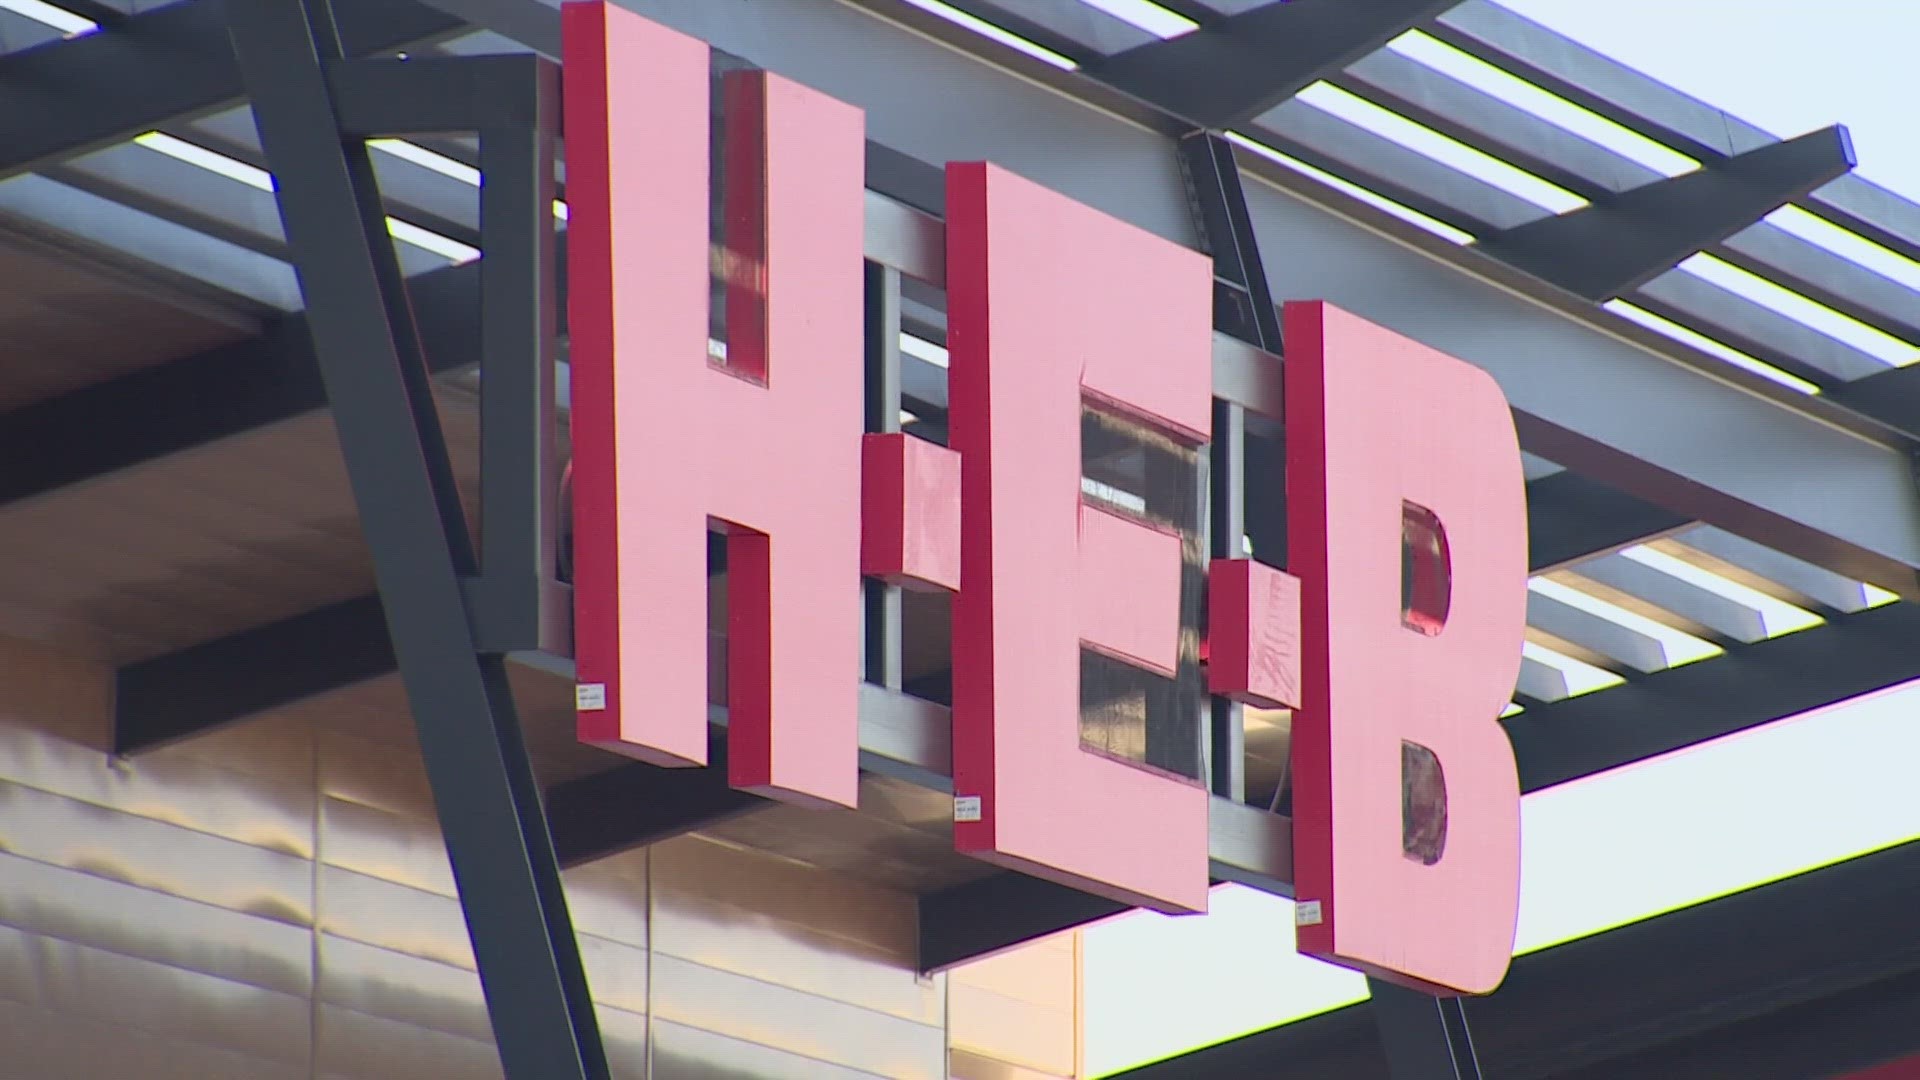 While the Allen store will be the latest H-E-B location to open in North Texas, the South Texas-based grocer already has plans for three more sites.